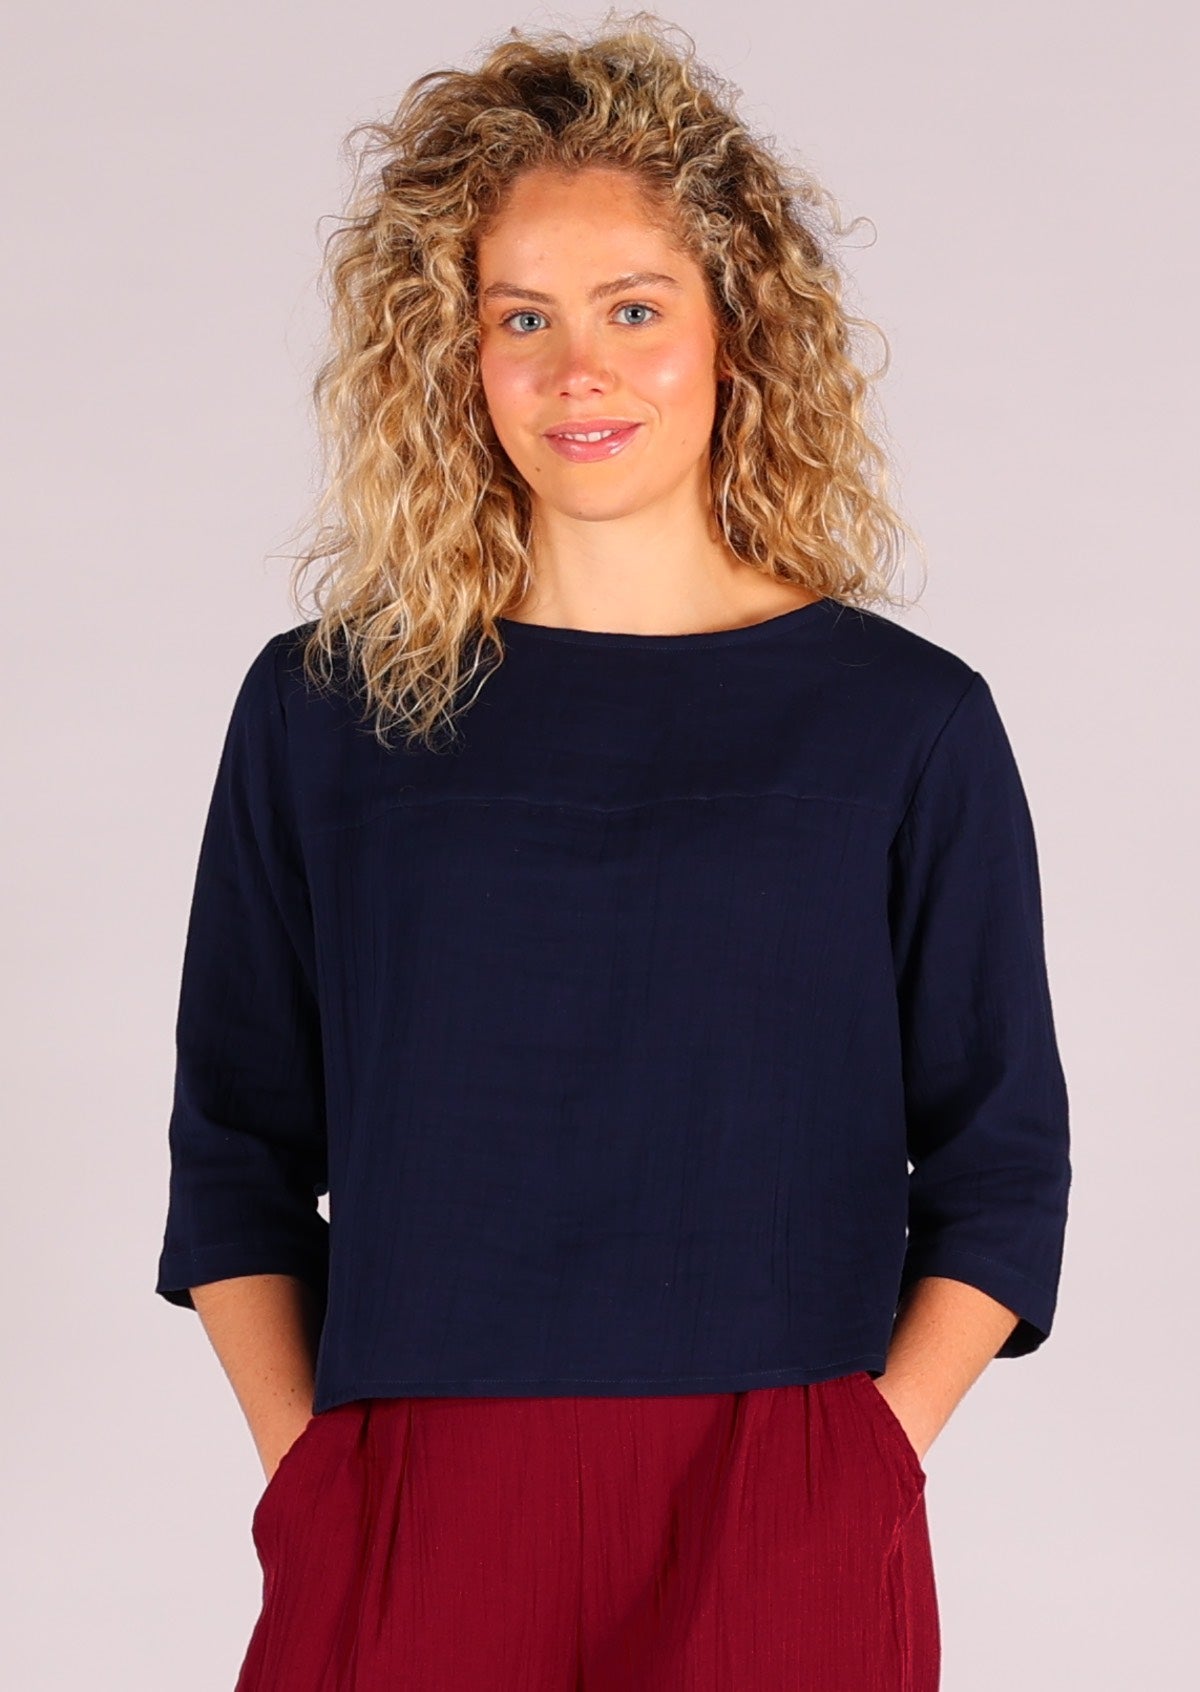 Model wears dark blue double cotton top with 3/4 sleeves and high round neckline